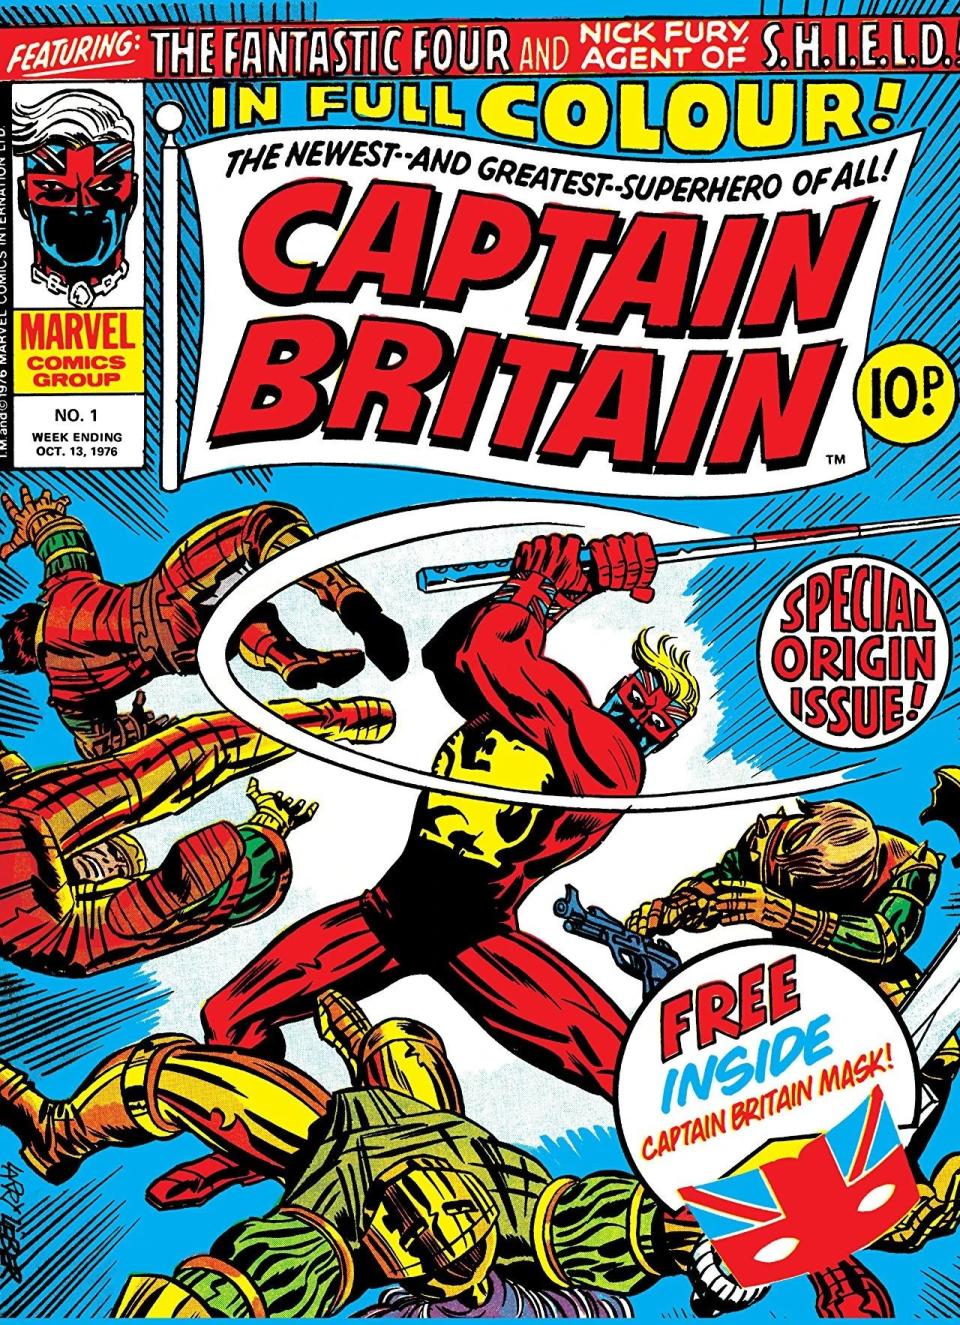 The cover of Captain Britain number 1 from 1976 depicts the hero in a red superhero suit with a golden lion on his chest walloping several bad guys.